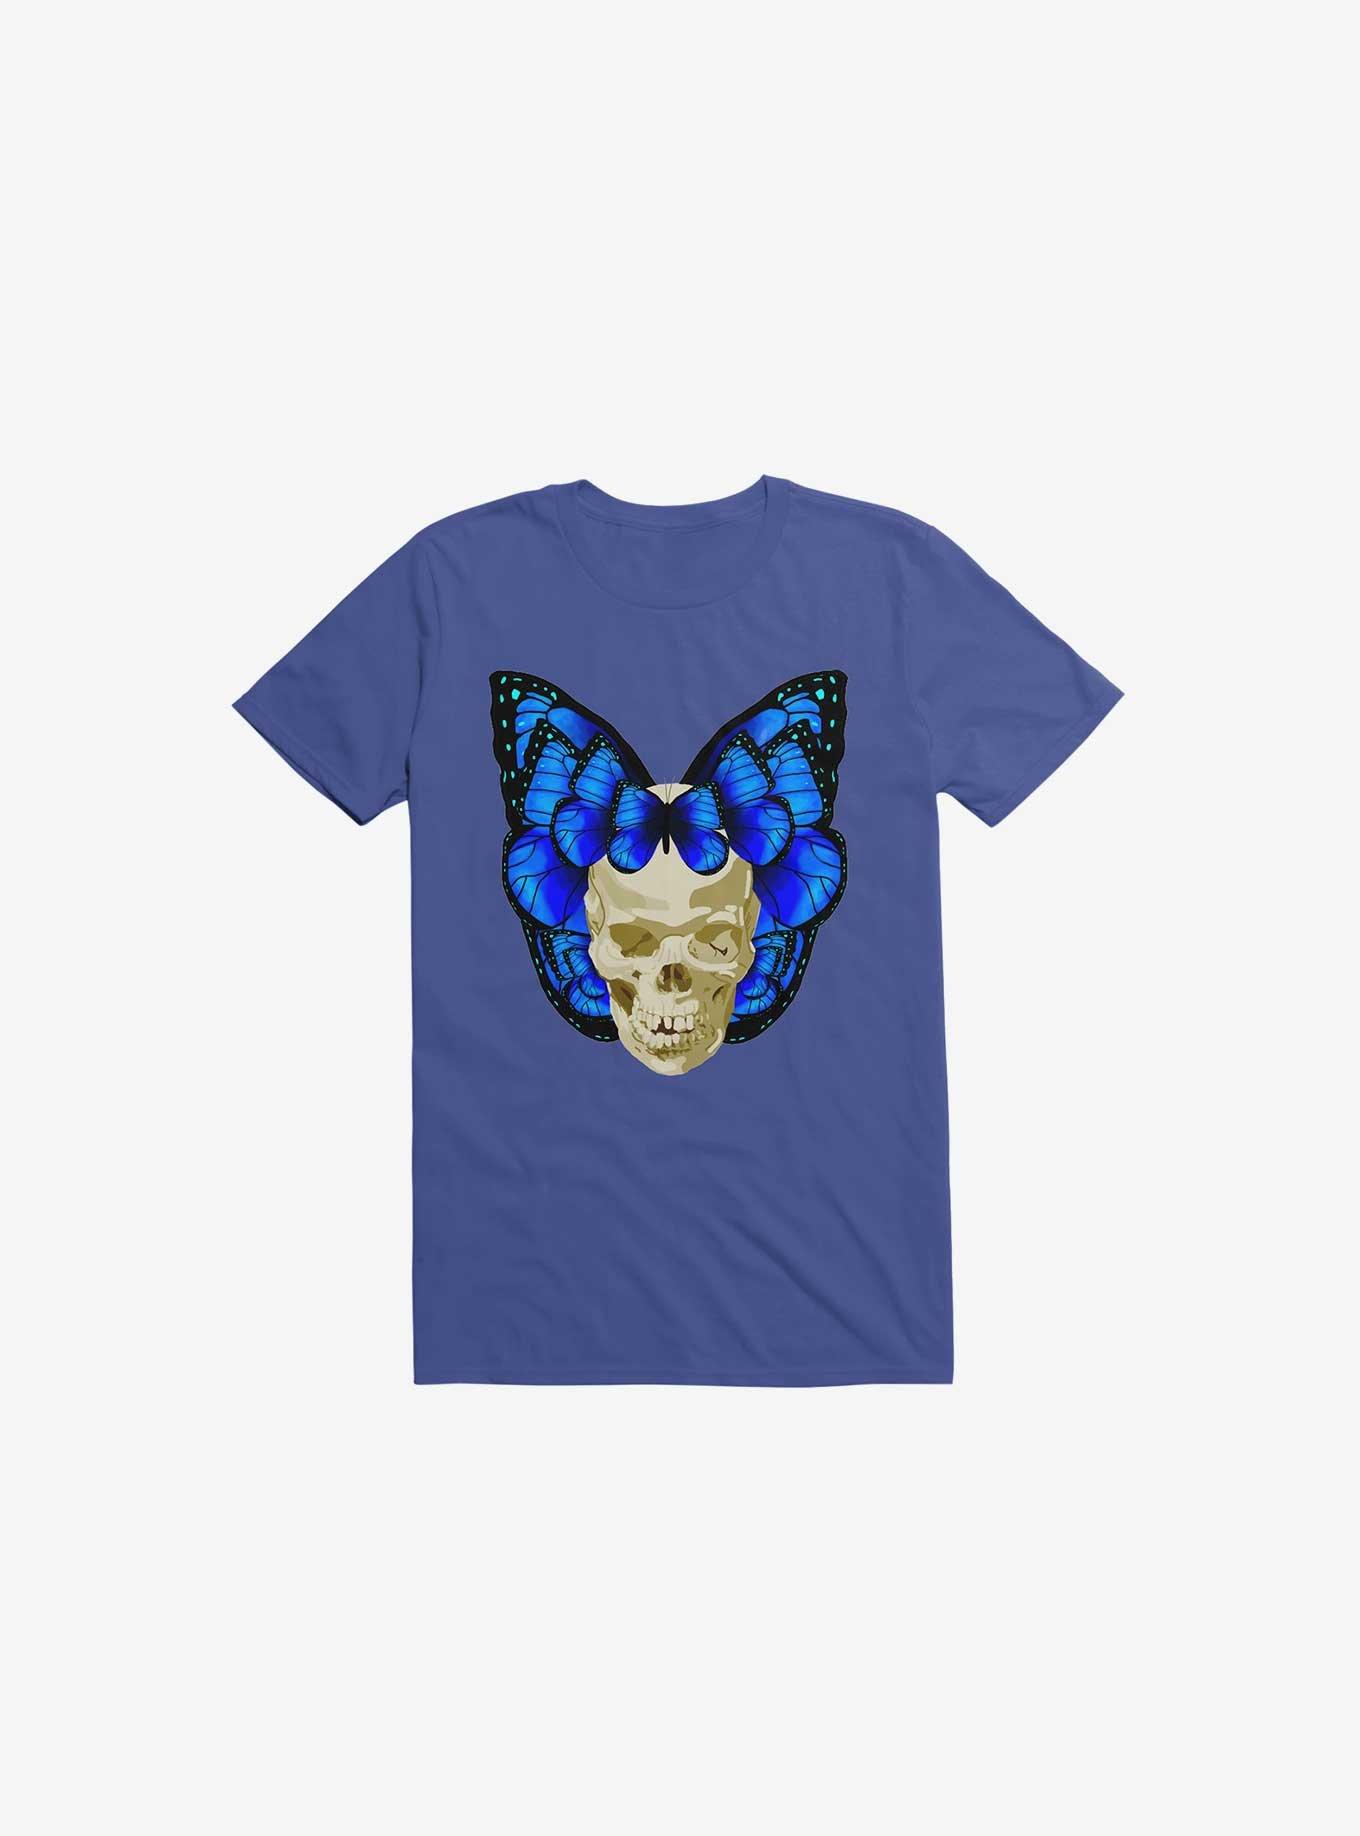 Wings Of Death Butterfly Skull Royal Blue T-Shirt